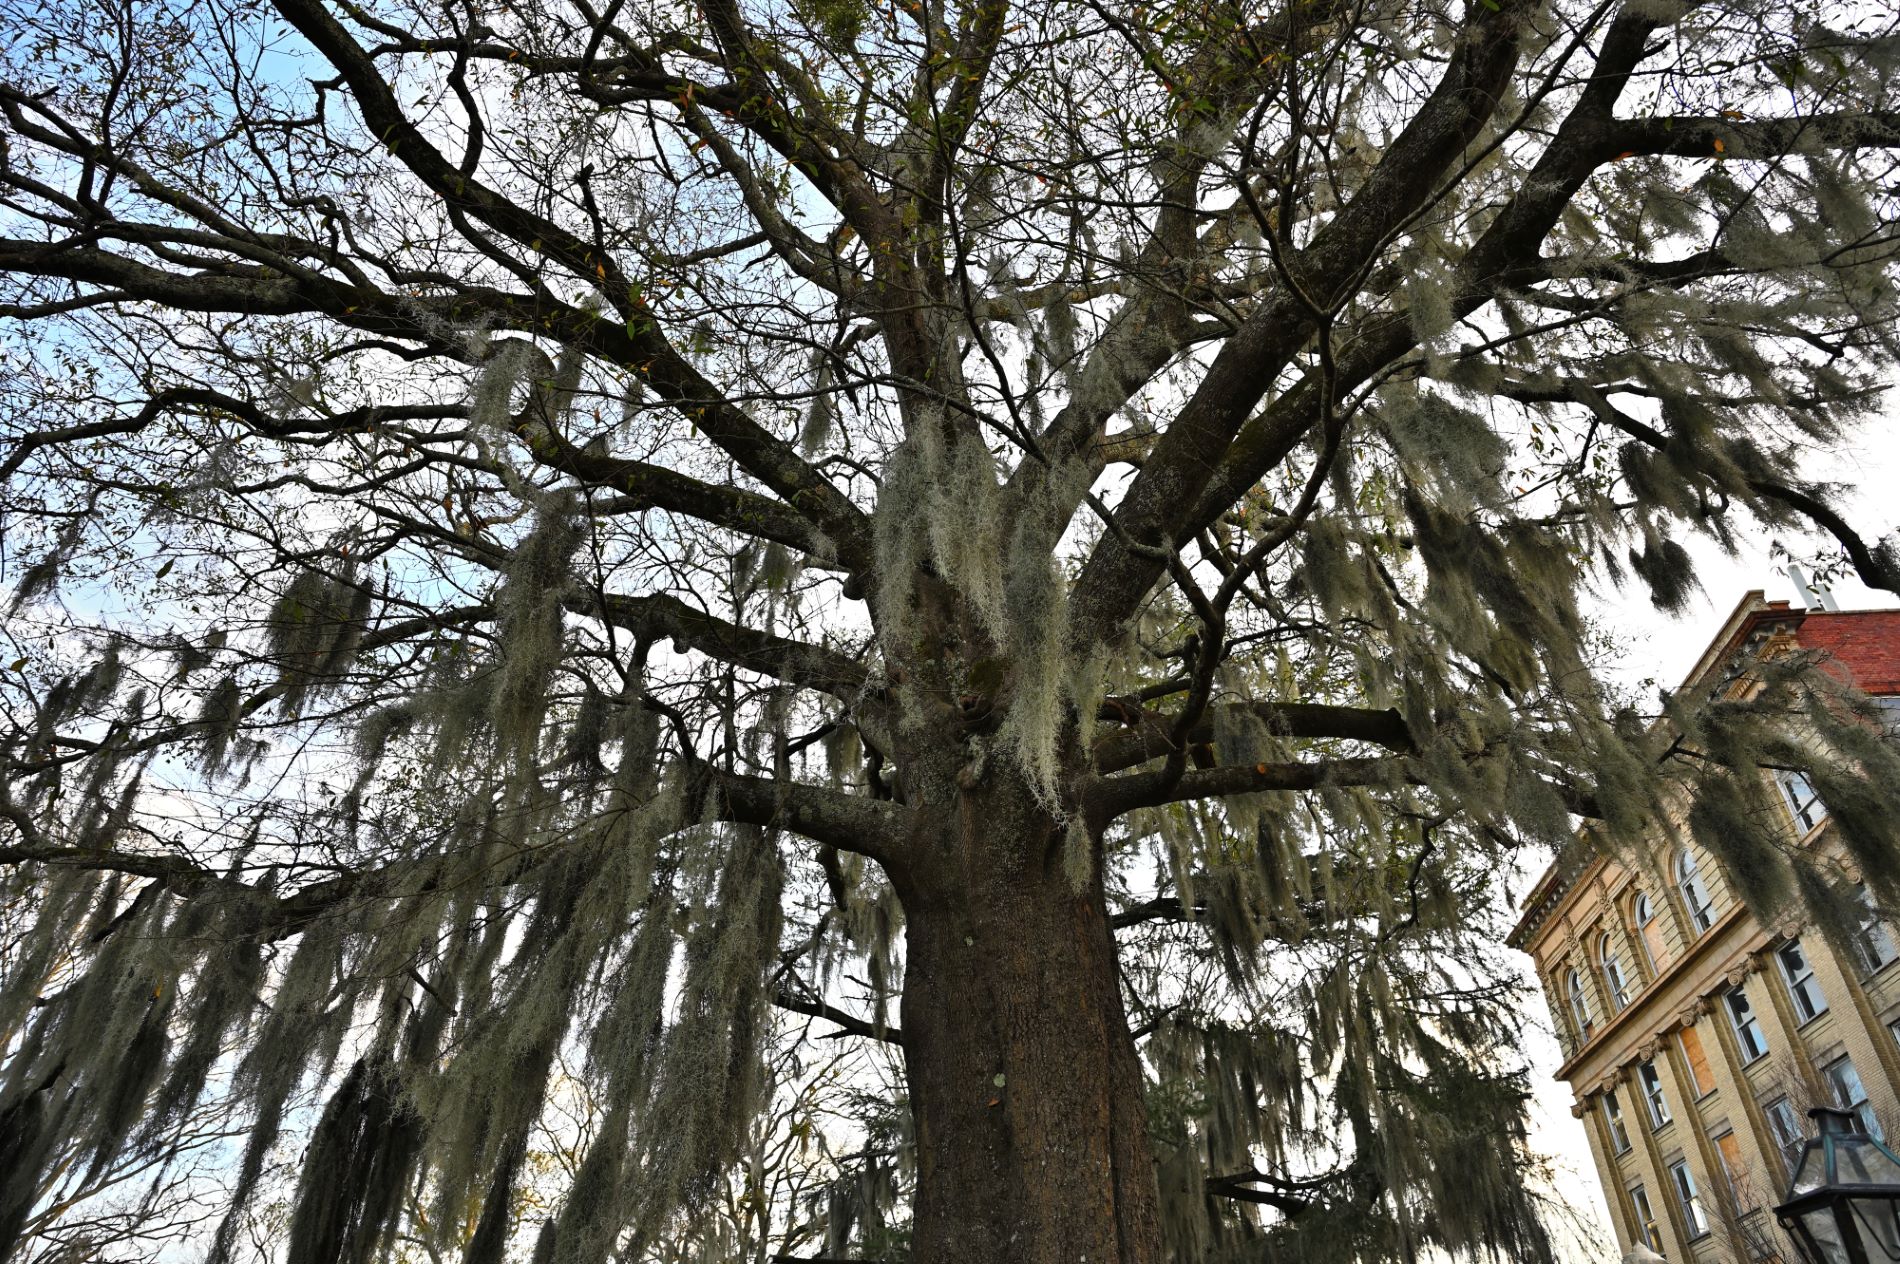 image of spanish moss hanging on a large tree